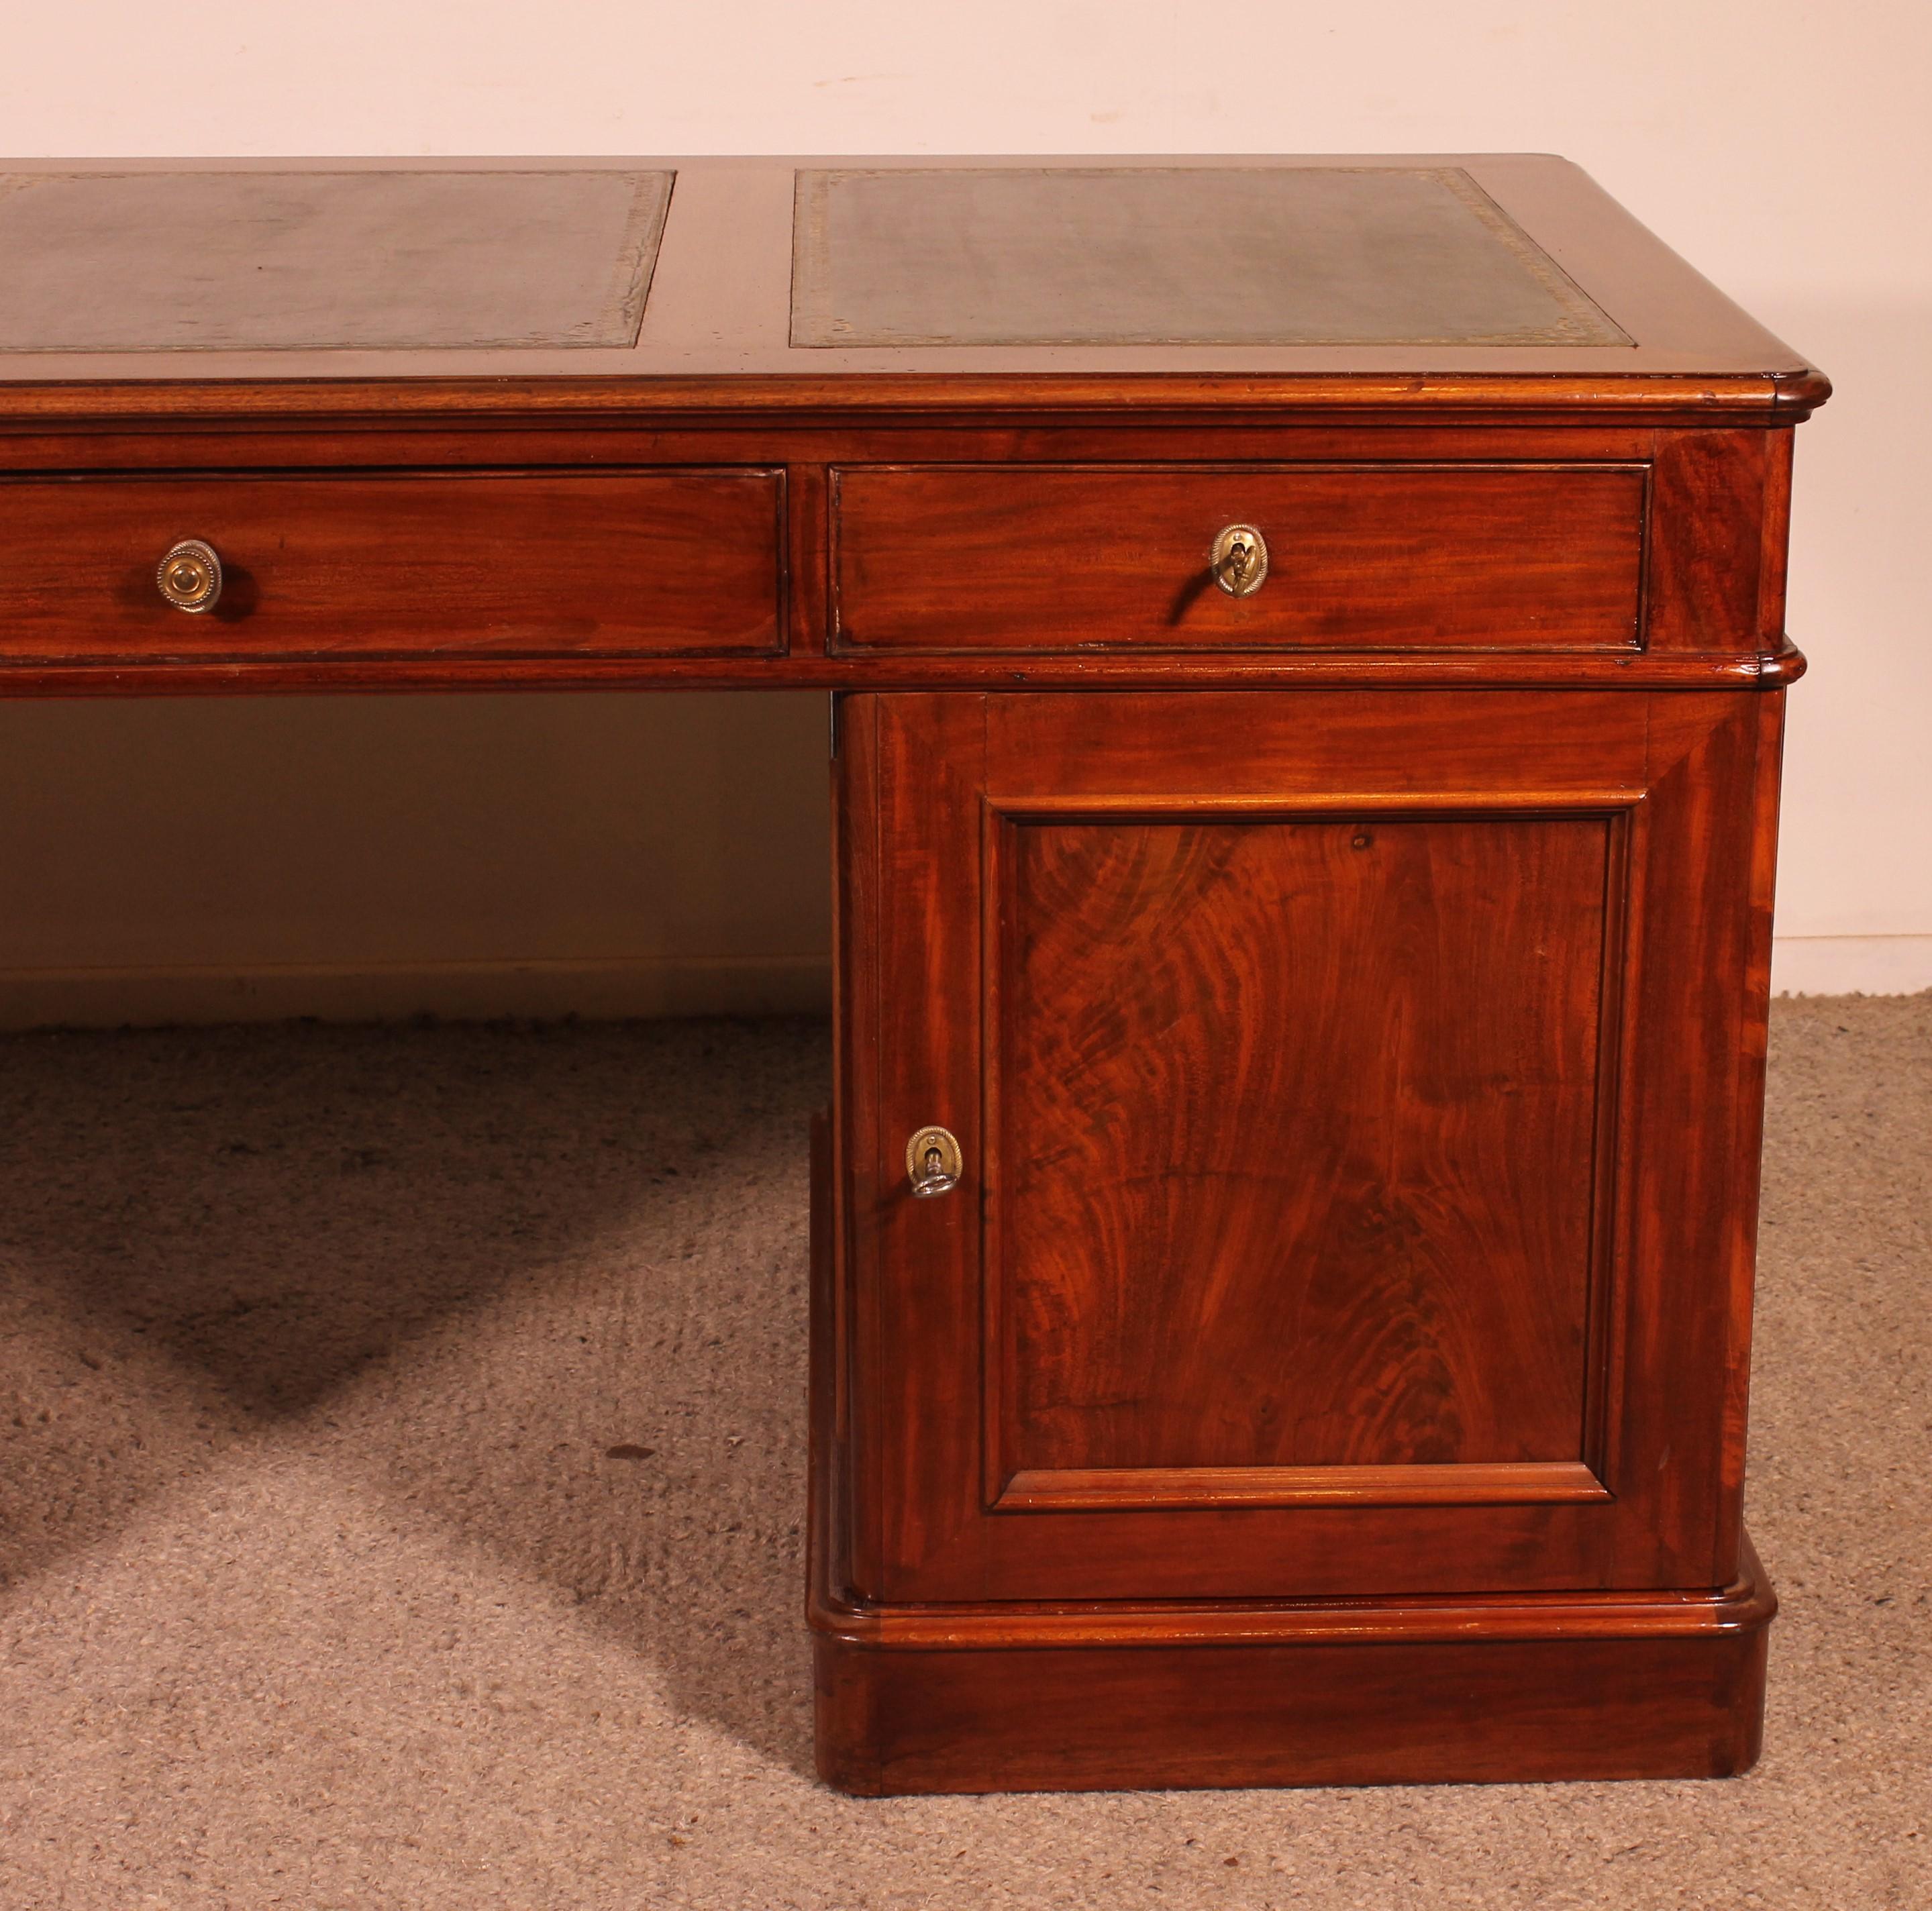 Elegant large mahogany pedestal desk from the 19th century

Very beautiful pedestal desk which has been worked on both sides which allows it to be placed in the middle of a room or against a wall.

The desk is composed of three drawers in the belt